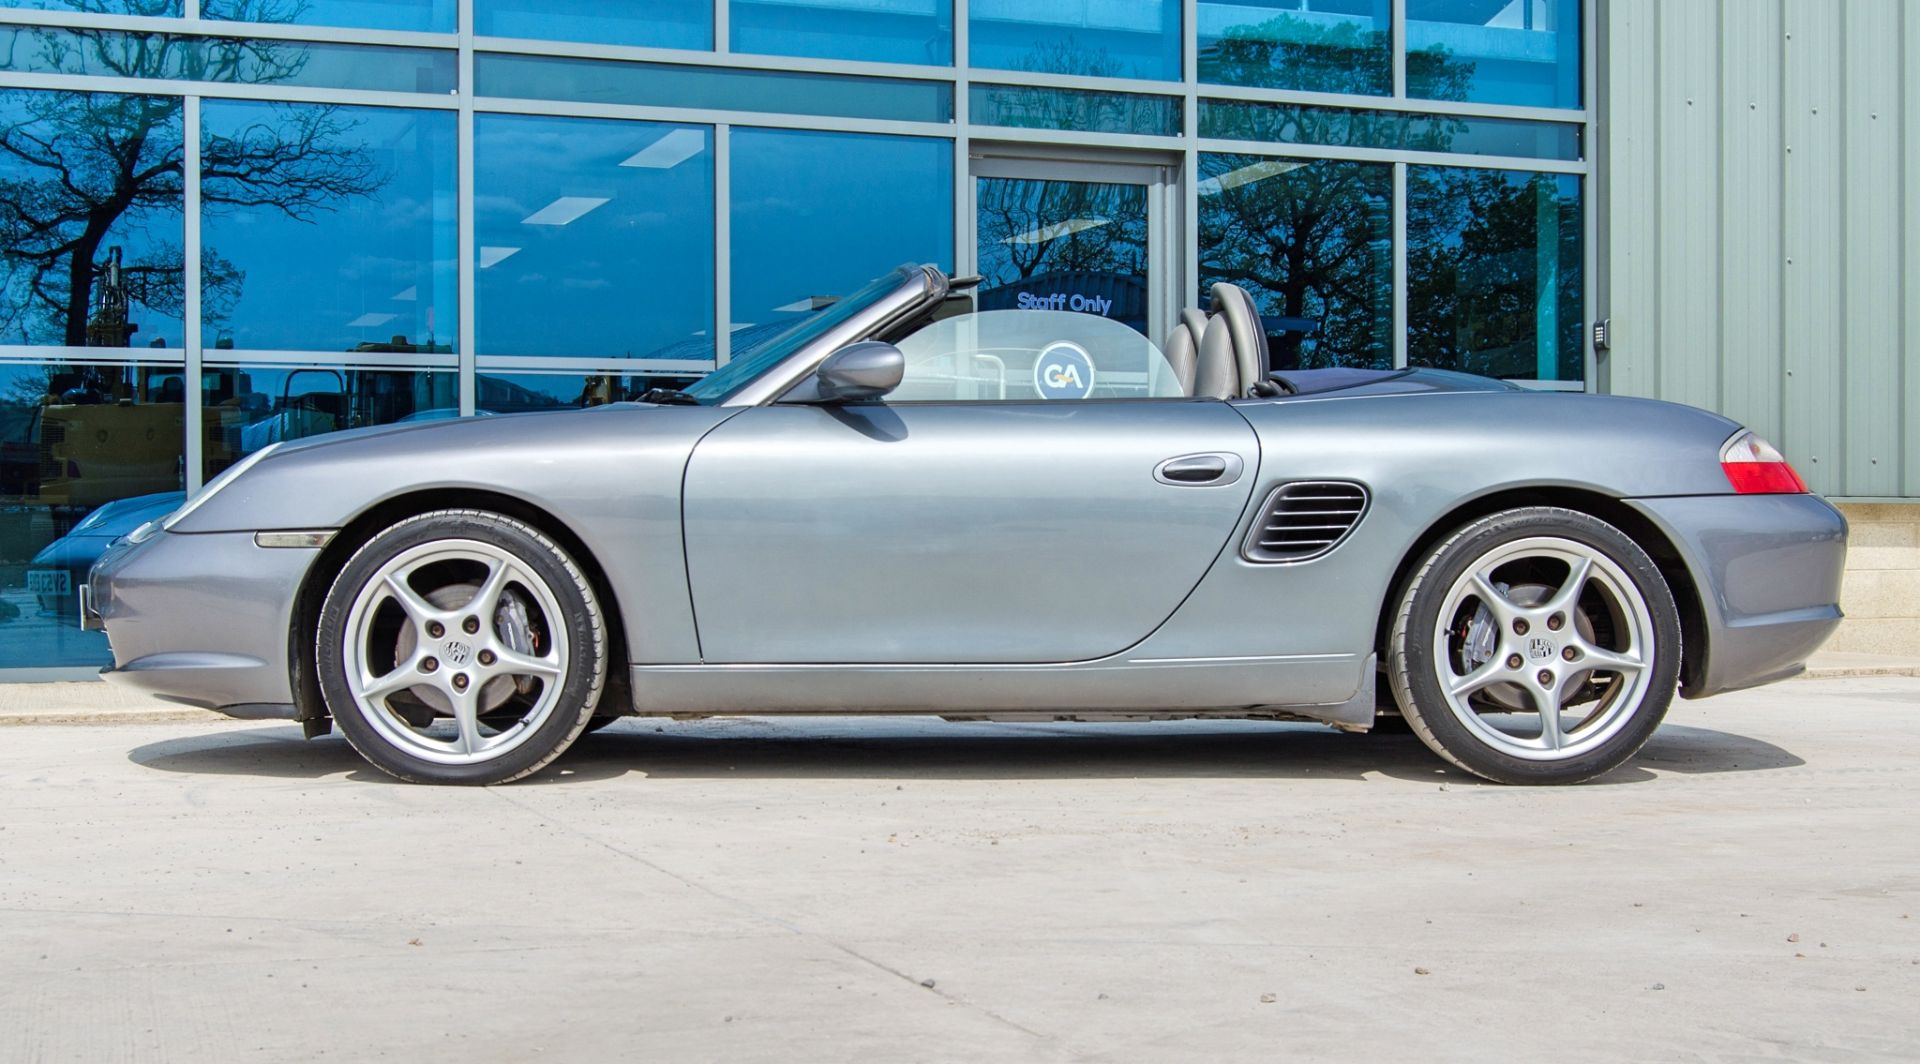 2003 Porsche Boxster 2.7 5 speed manual convertible roadster - Image 15 of 50